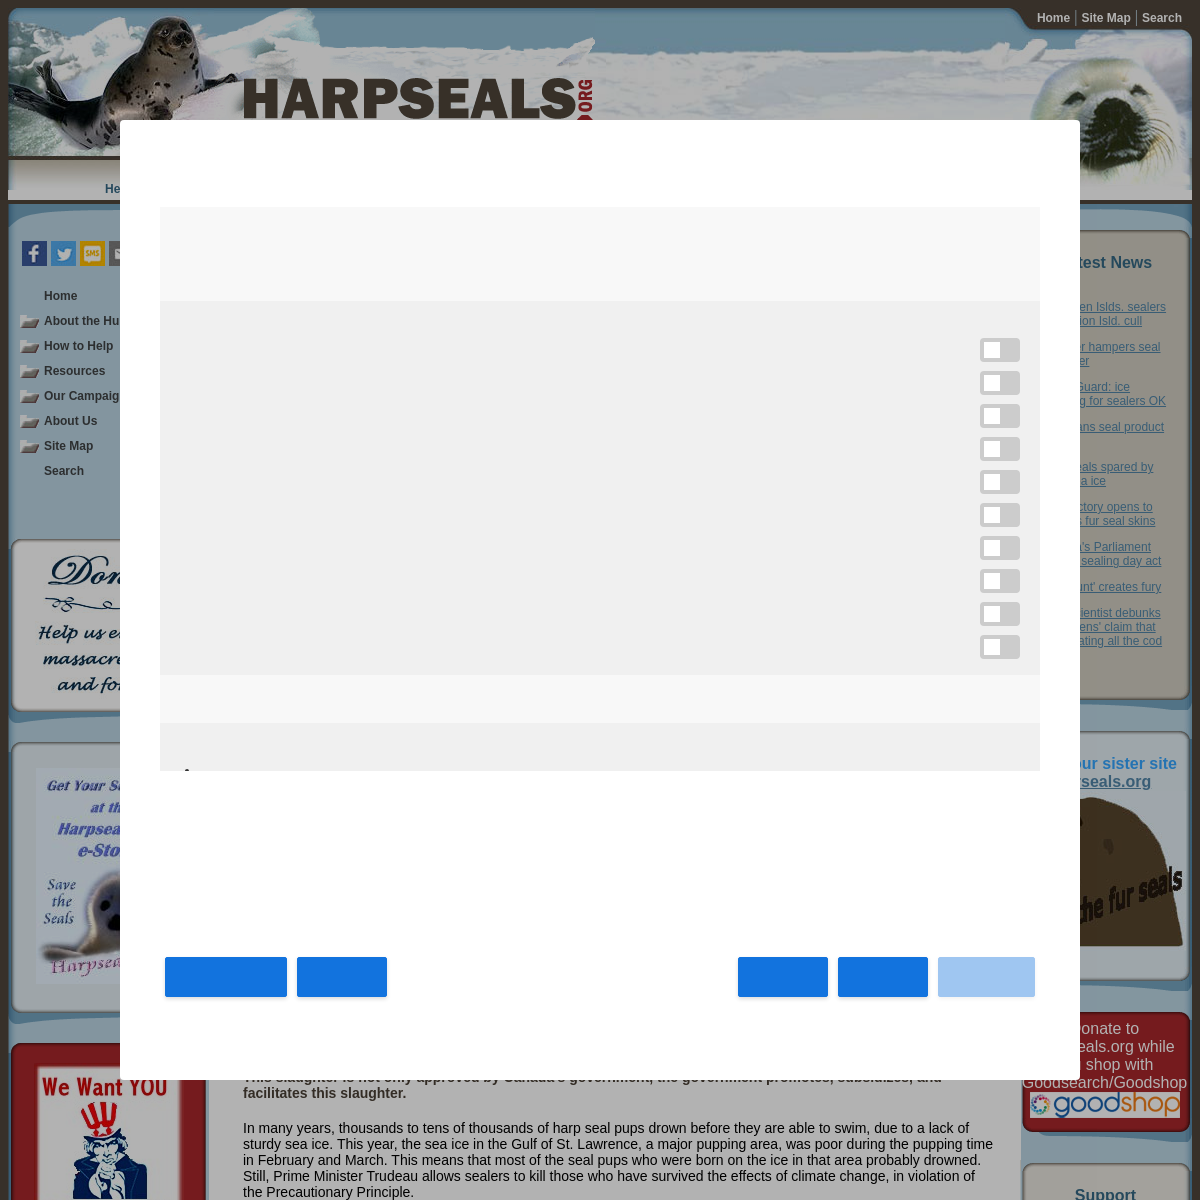 A complete backup of harpseals.org